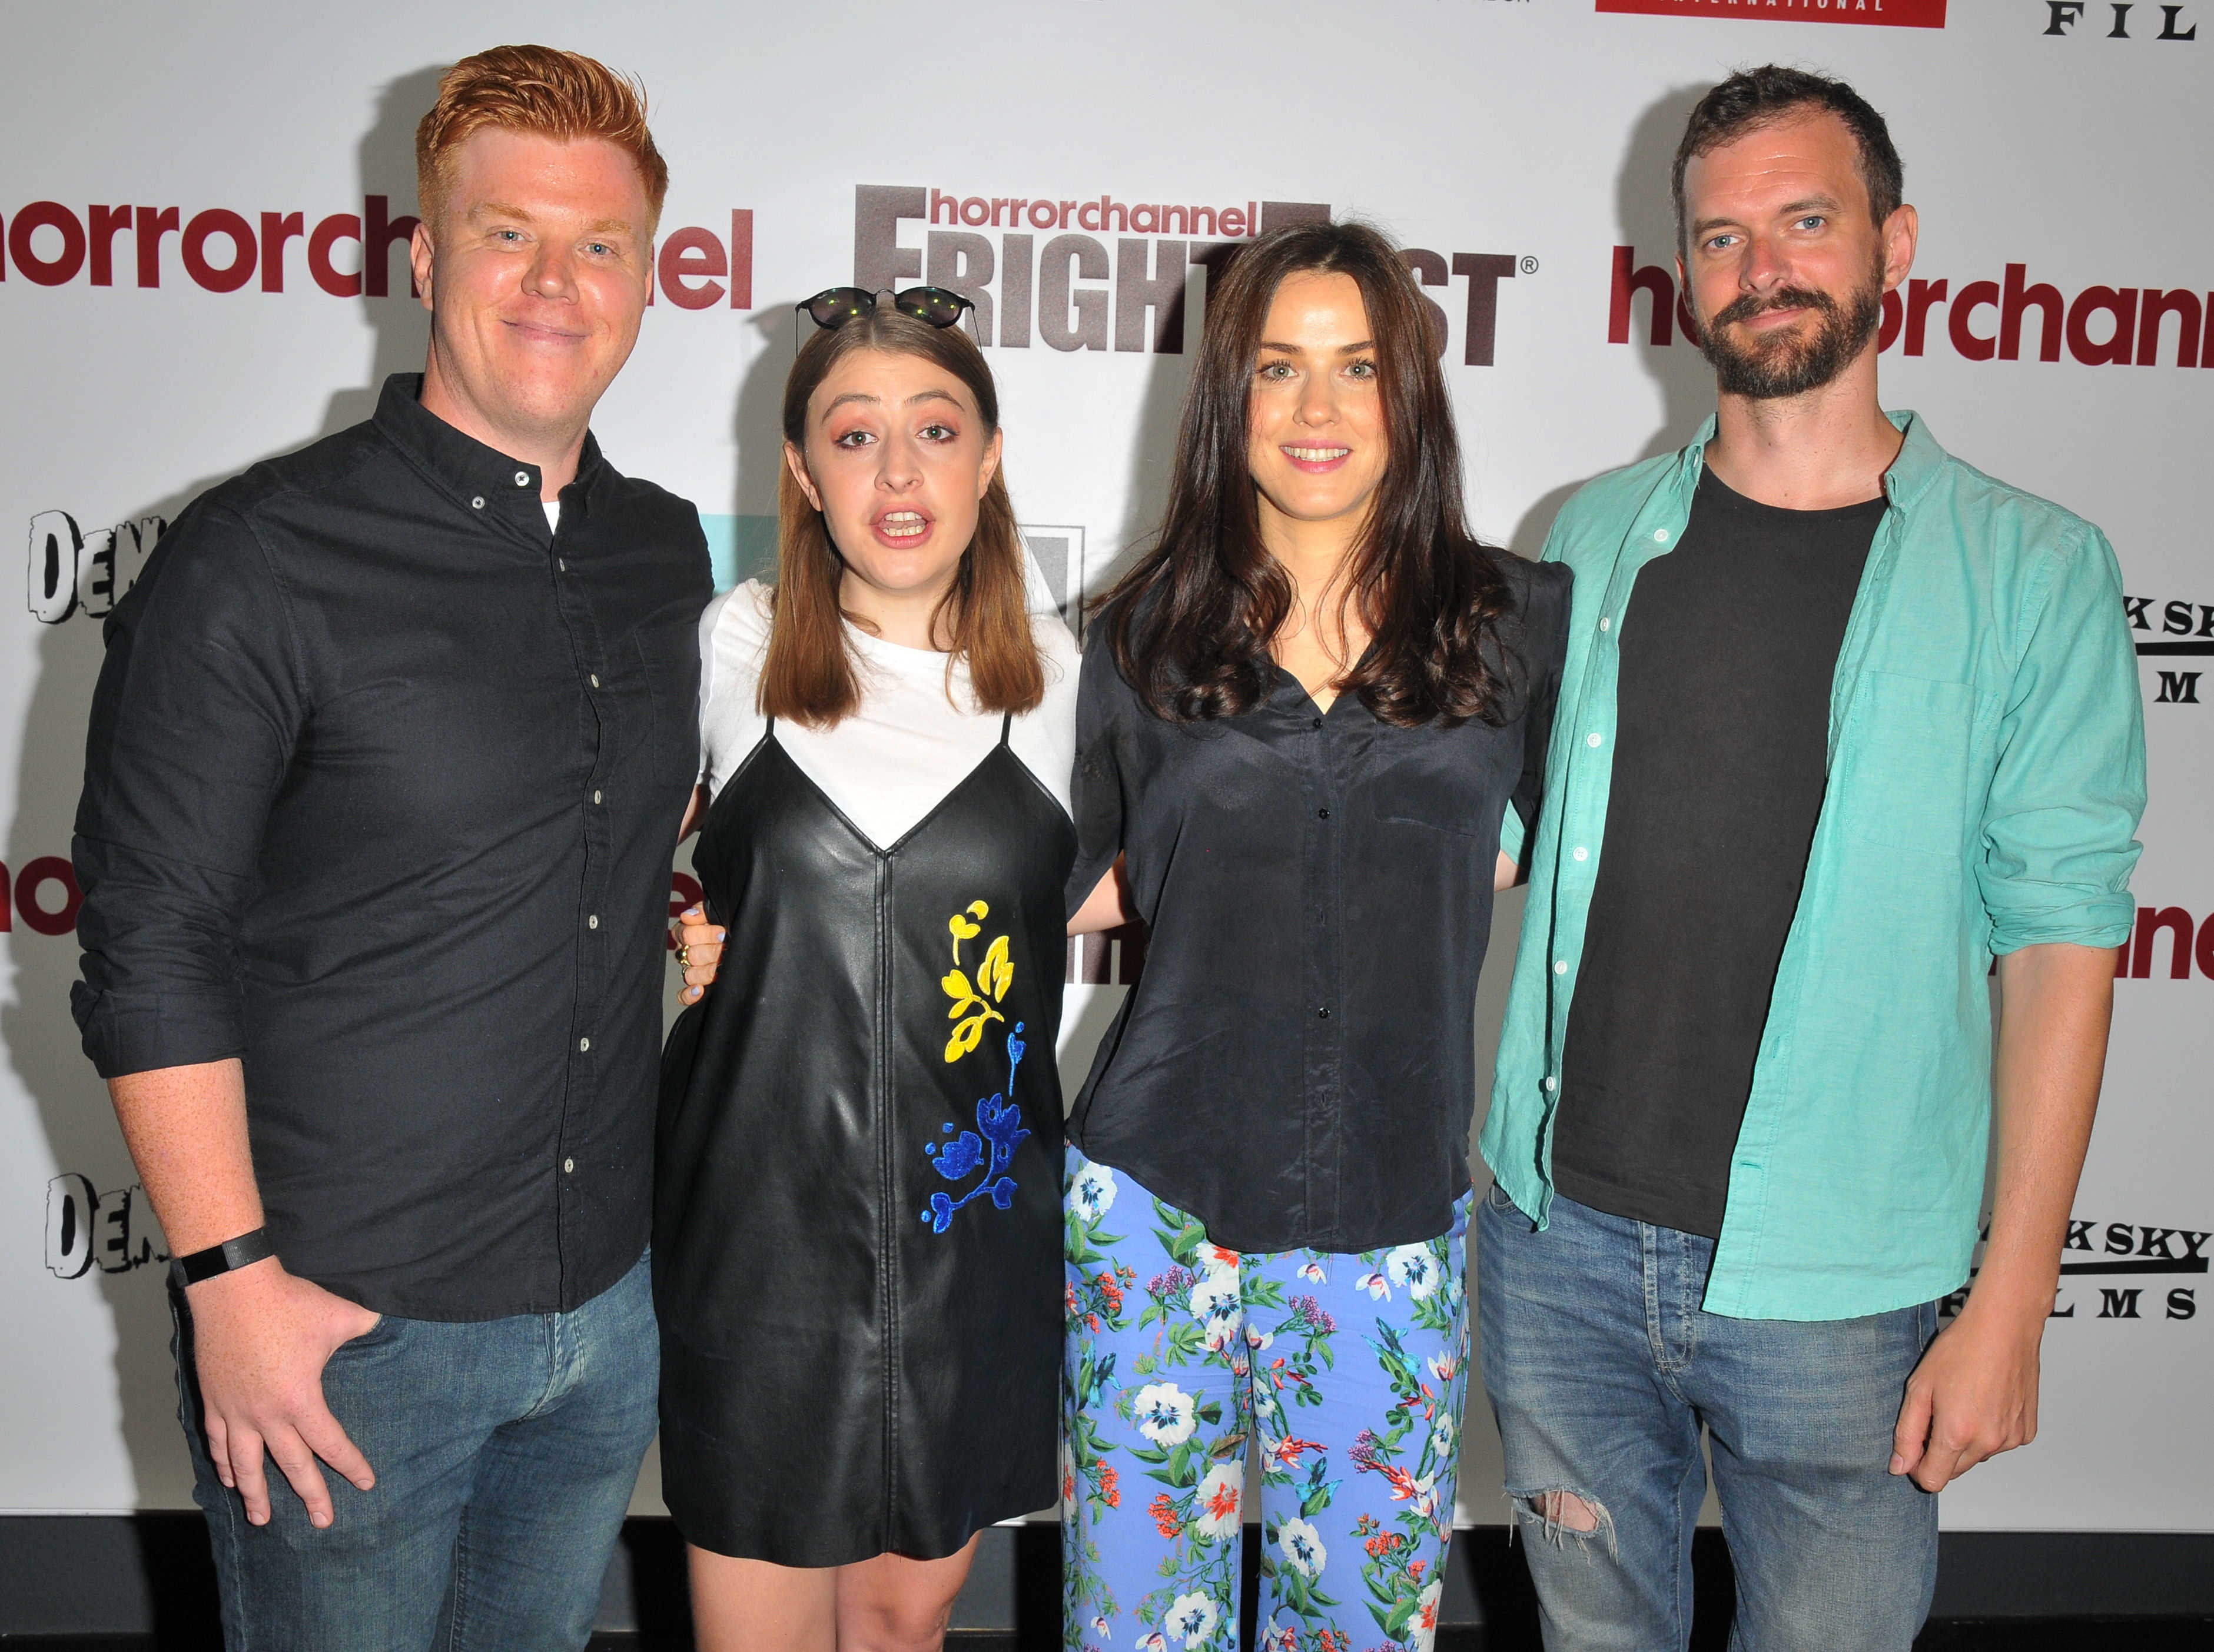 Georgia Groome at the premiere of ‘Date Night’ Horror Channel FrightFest